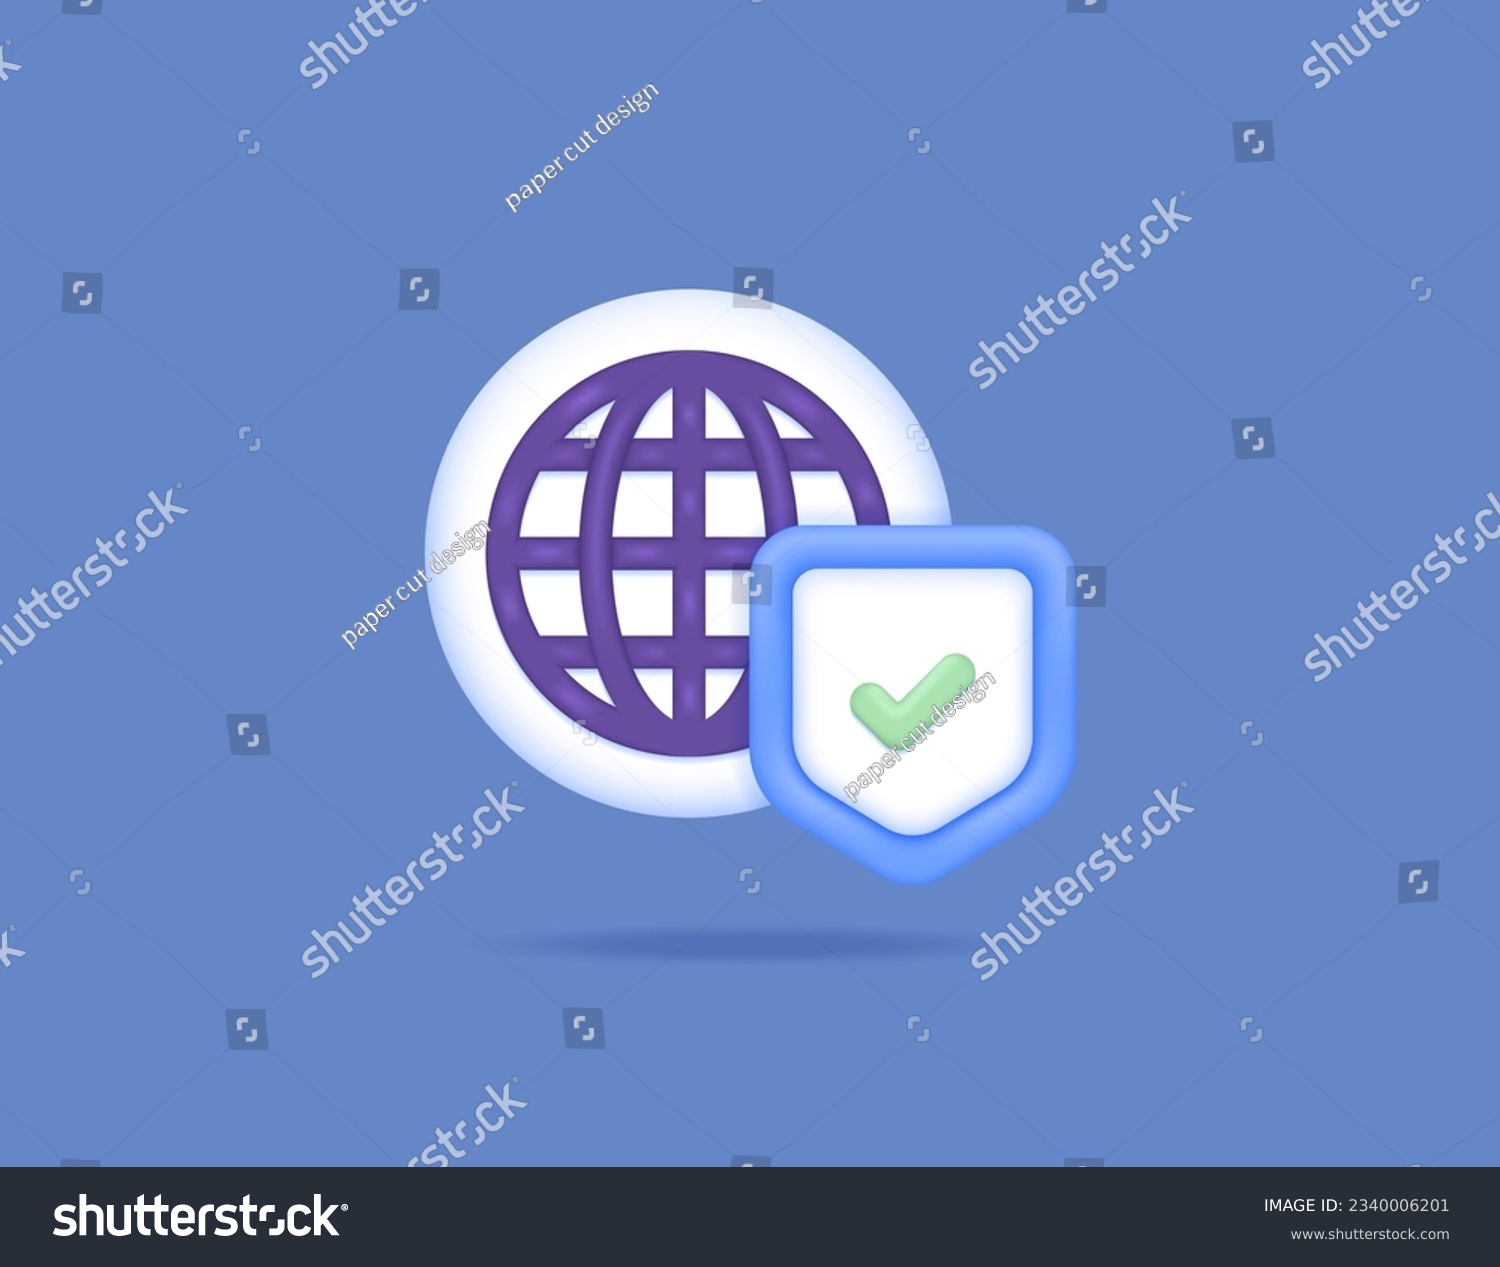 browsing safety. protection from malicious websites, phishing websites, and suspicious links. guard, protector, security, and antivirus. shield and internet. symbols and icons. minimalist 3d concept  #2340006201